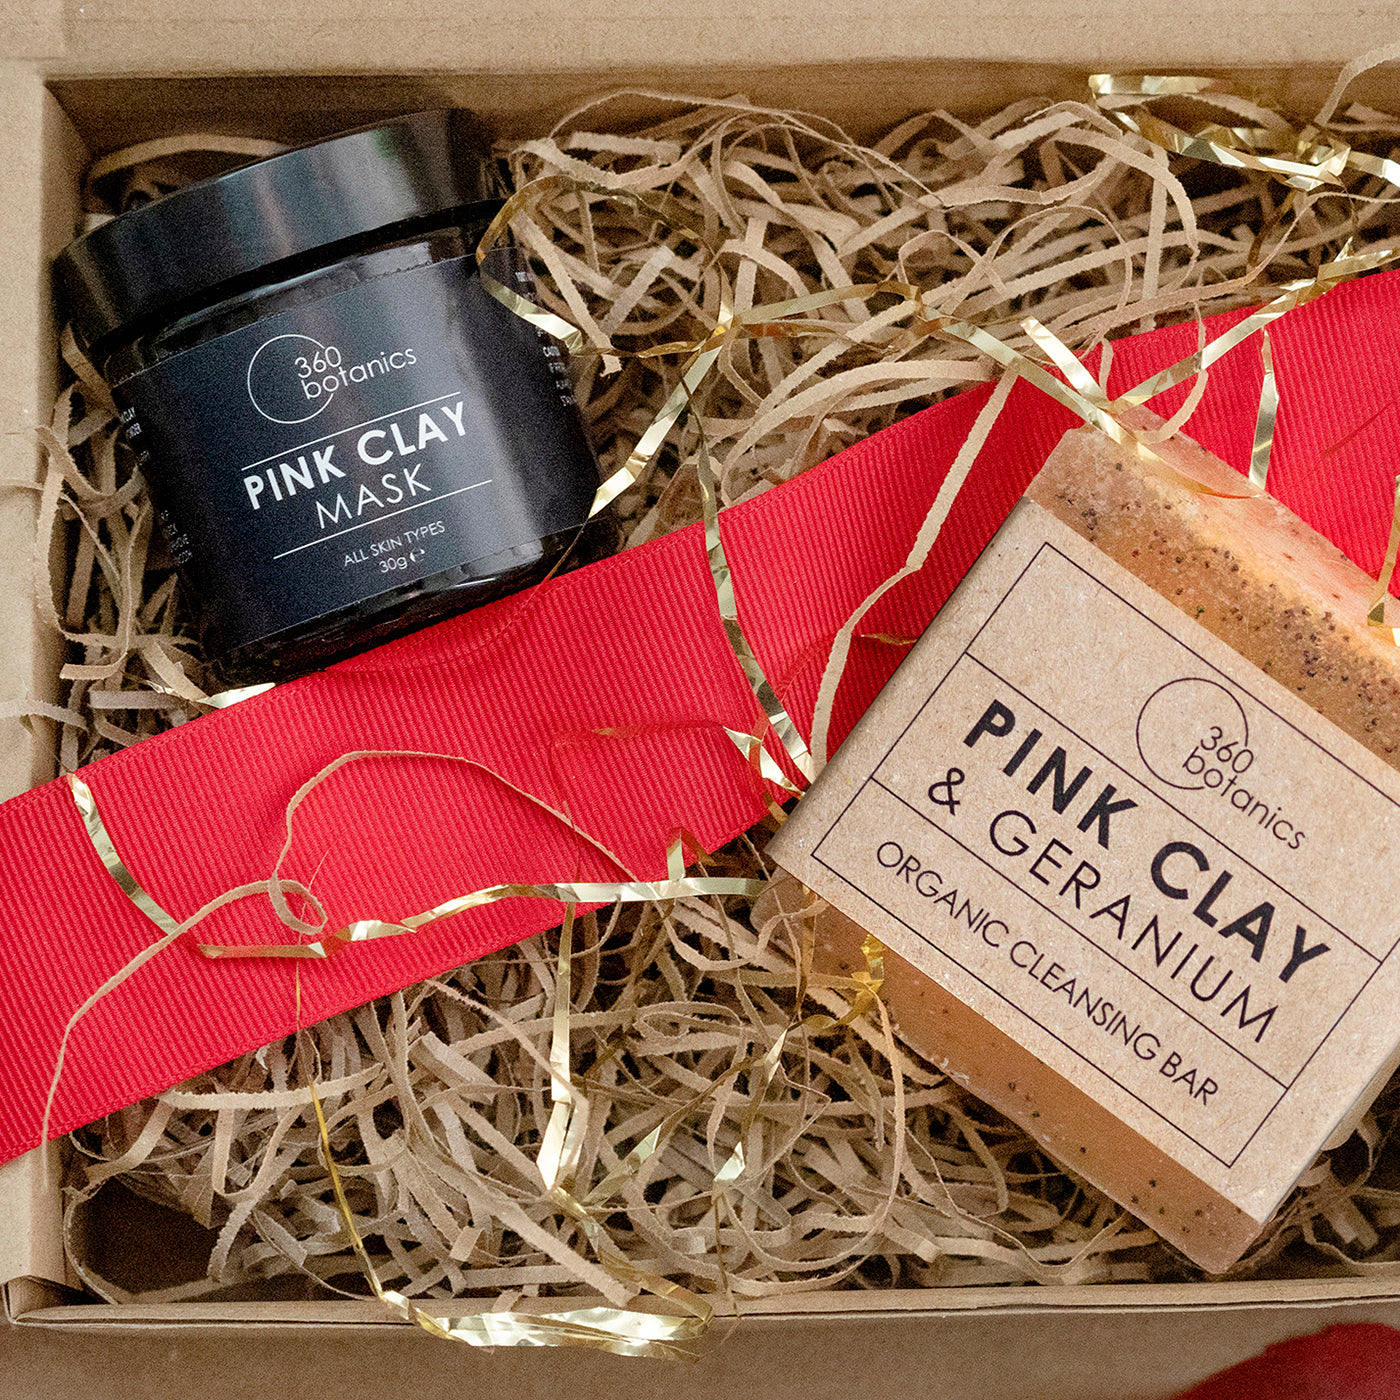 Pin clay mask and Pink clay soap in gift box with red ribbon